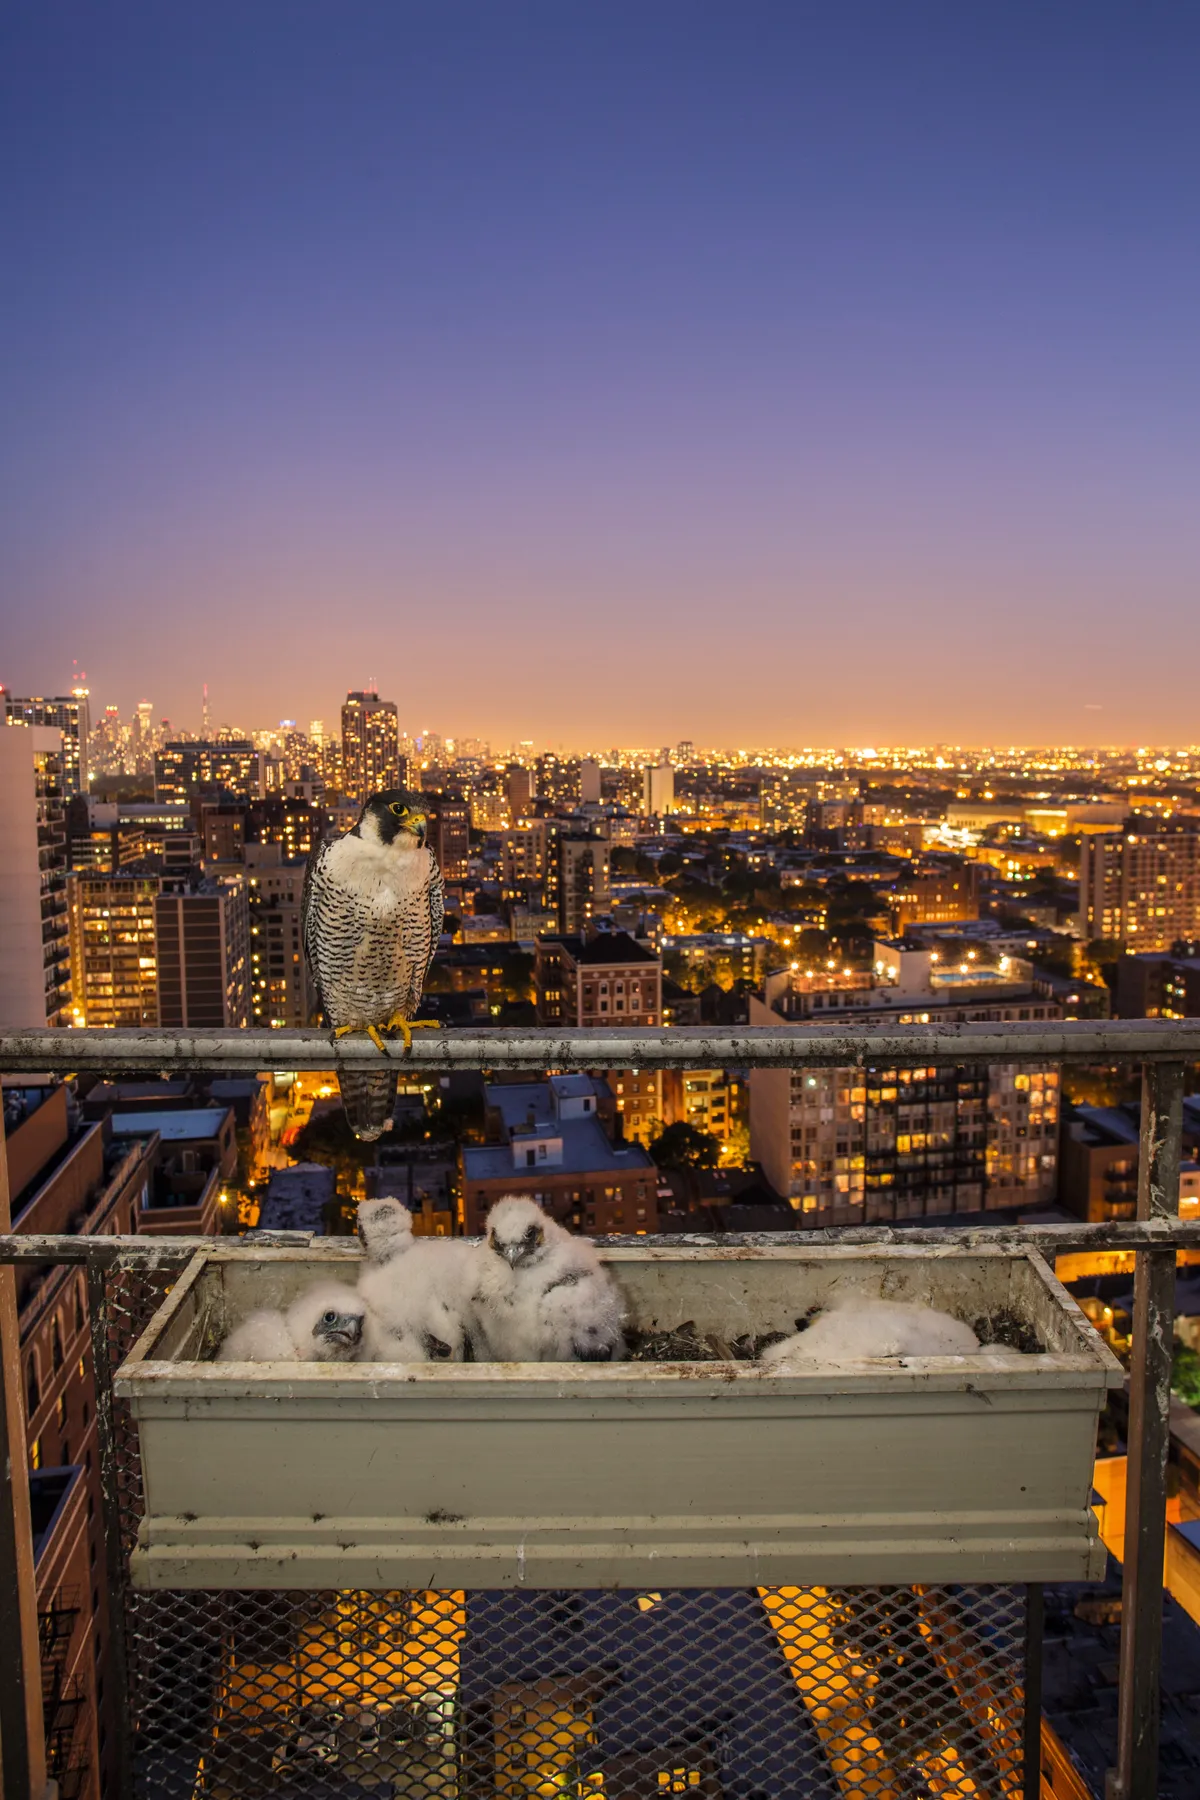 A rare night-time photograph of the female and her brood. Helped by the city glow, urban peregrines are known to hunt after dark. © Luke Massey.